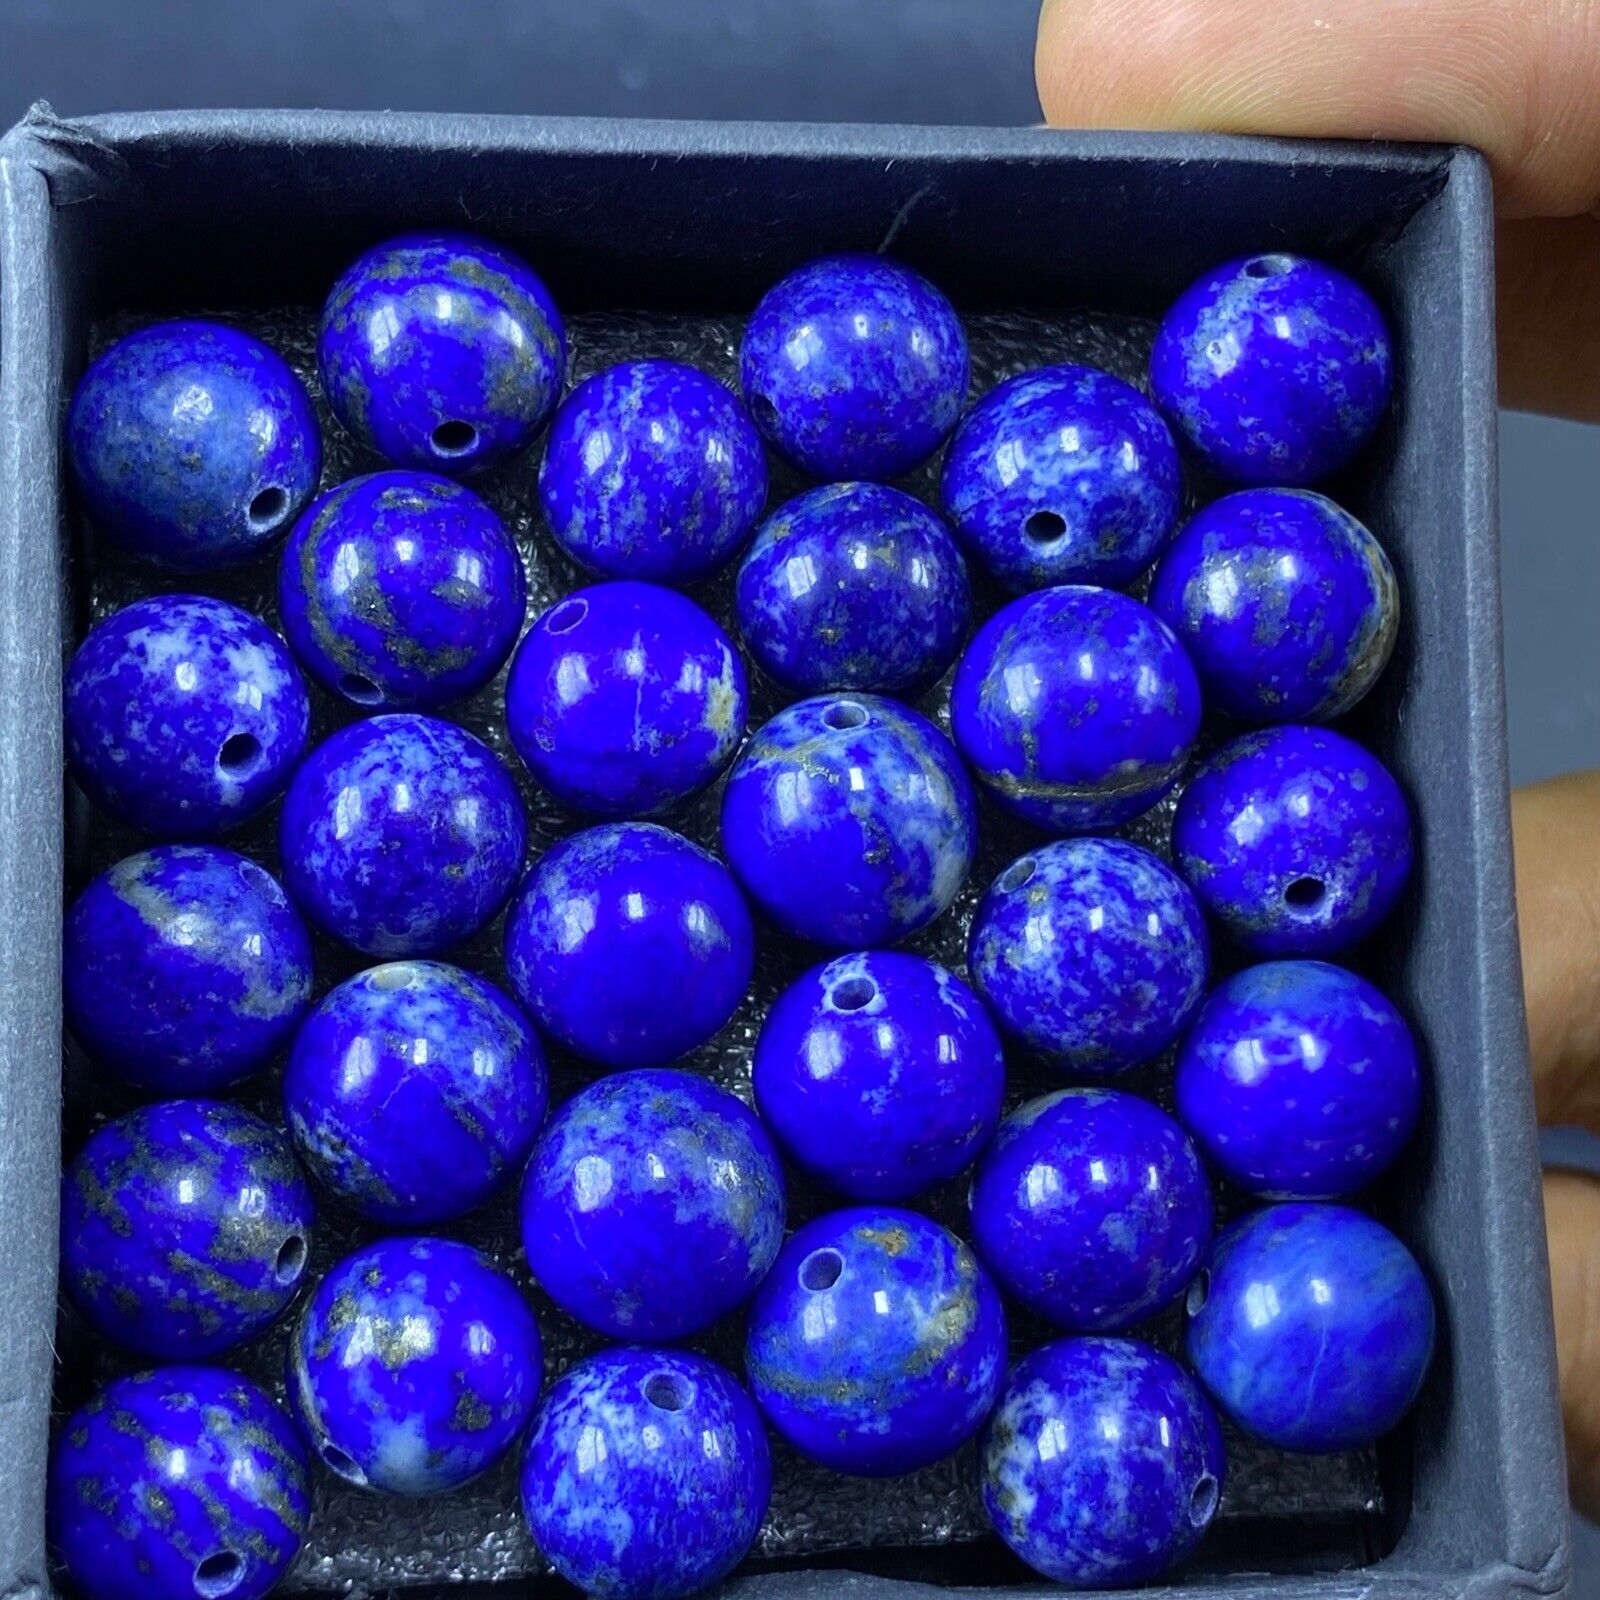 30 Pcs natural lapis lazuli drilled beads AAA+ Quality box from Afghanistan